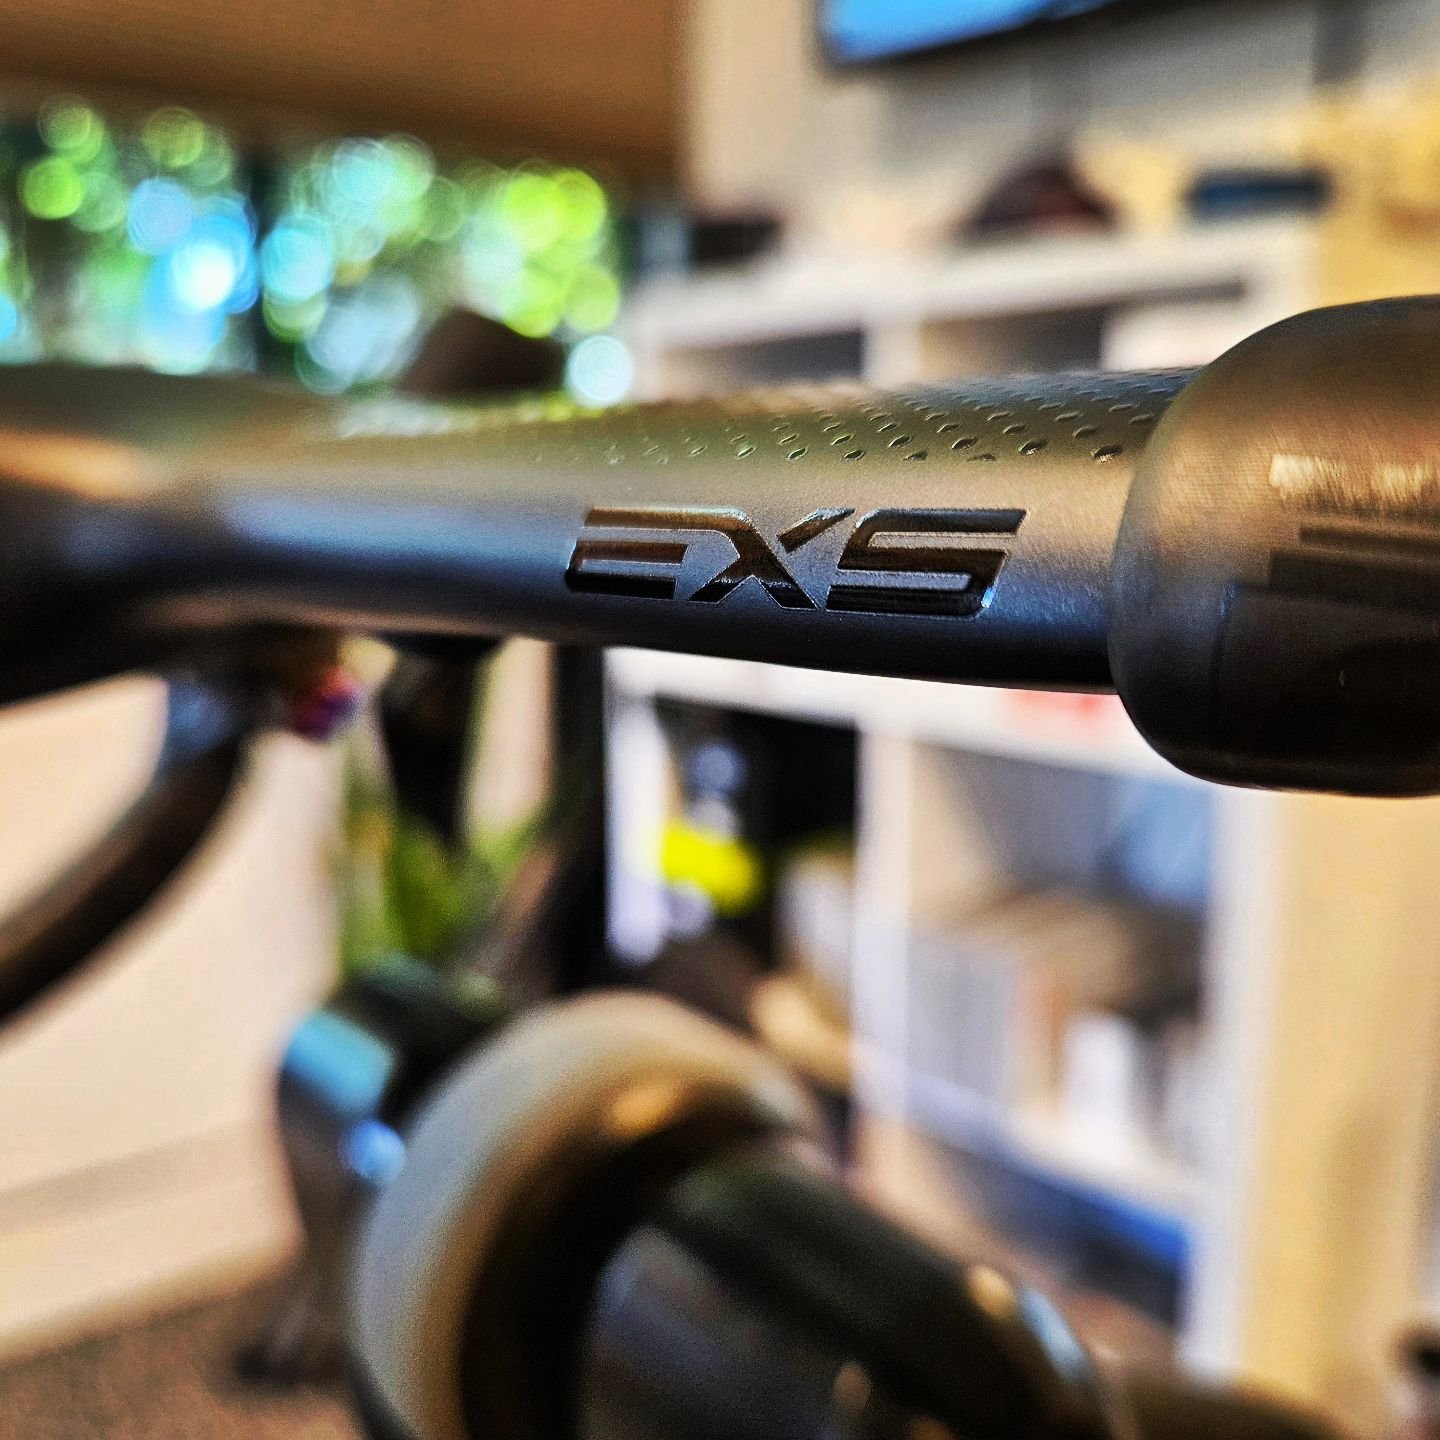 Awesome to see this rocket 🚀 come together from pre-fit iteration to finished whip.

Ride the hell out of this thing @markel1492 !

#bikefitting 
#bikefit